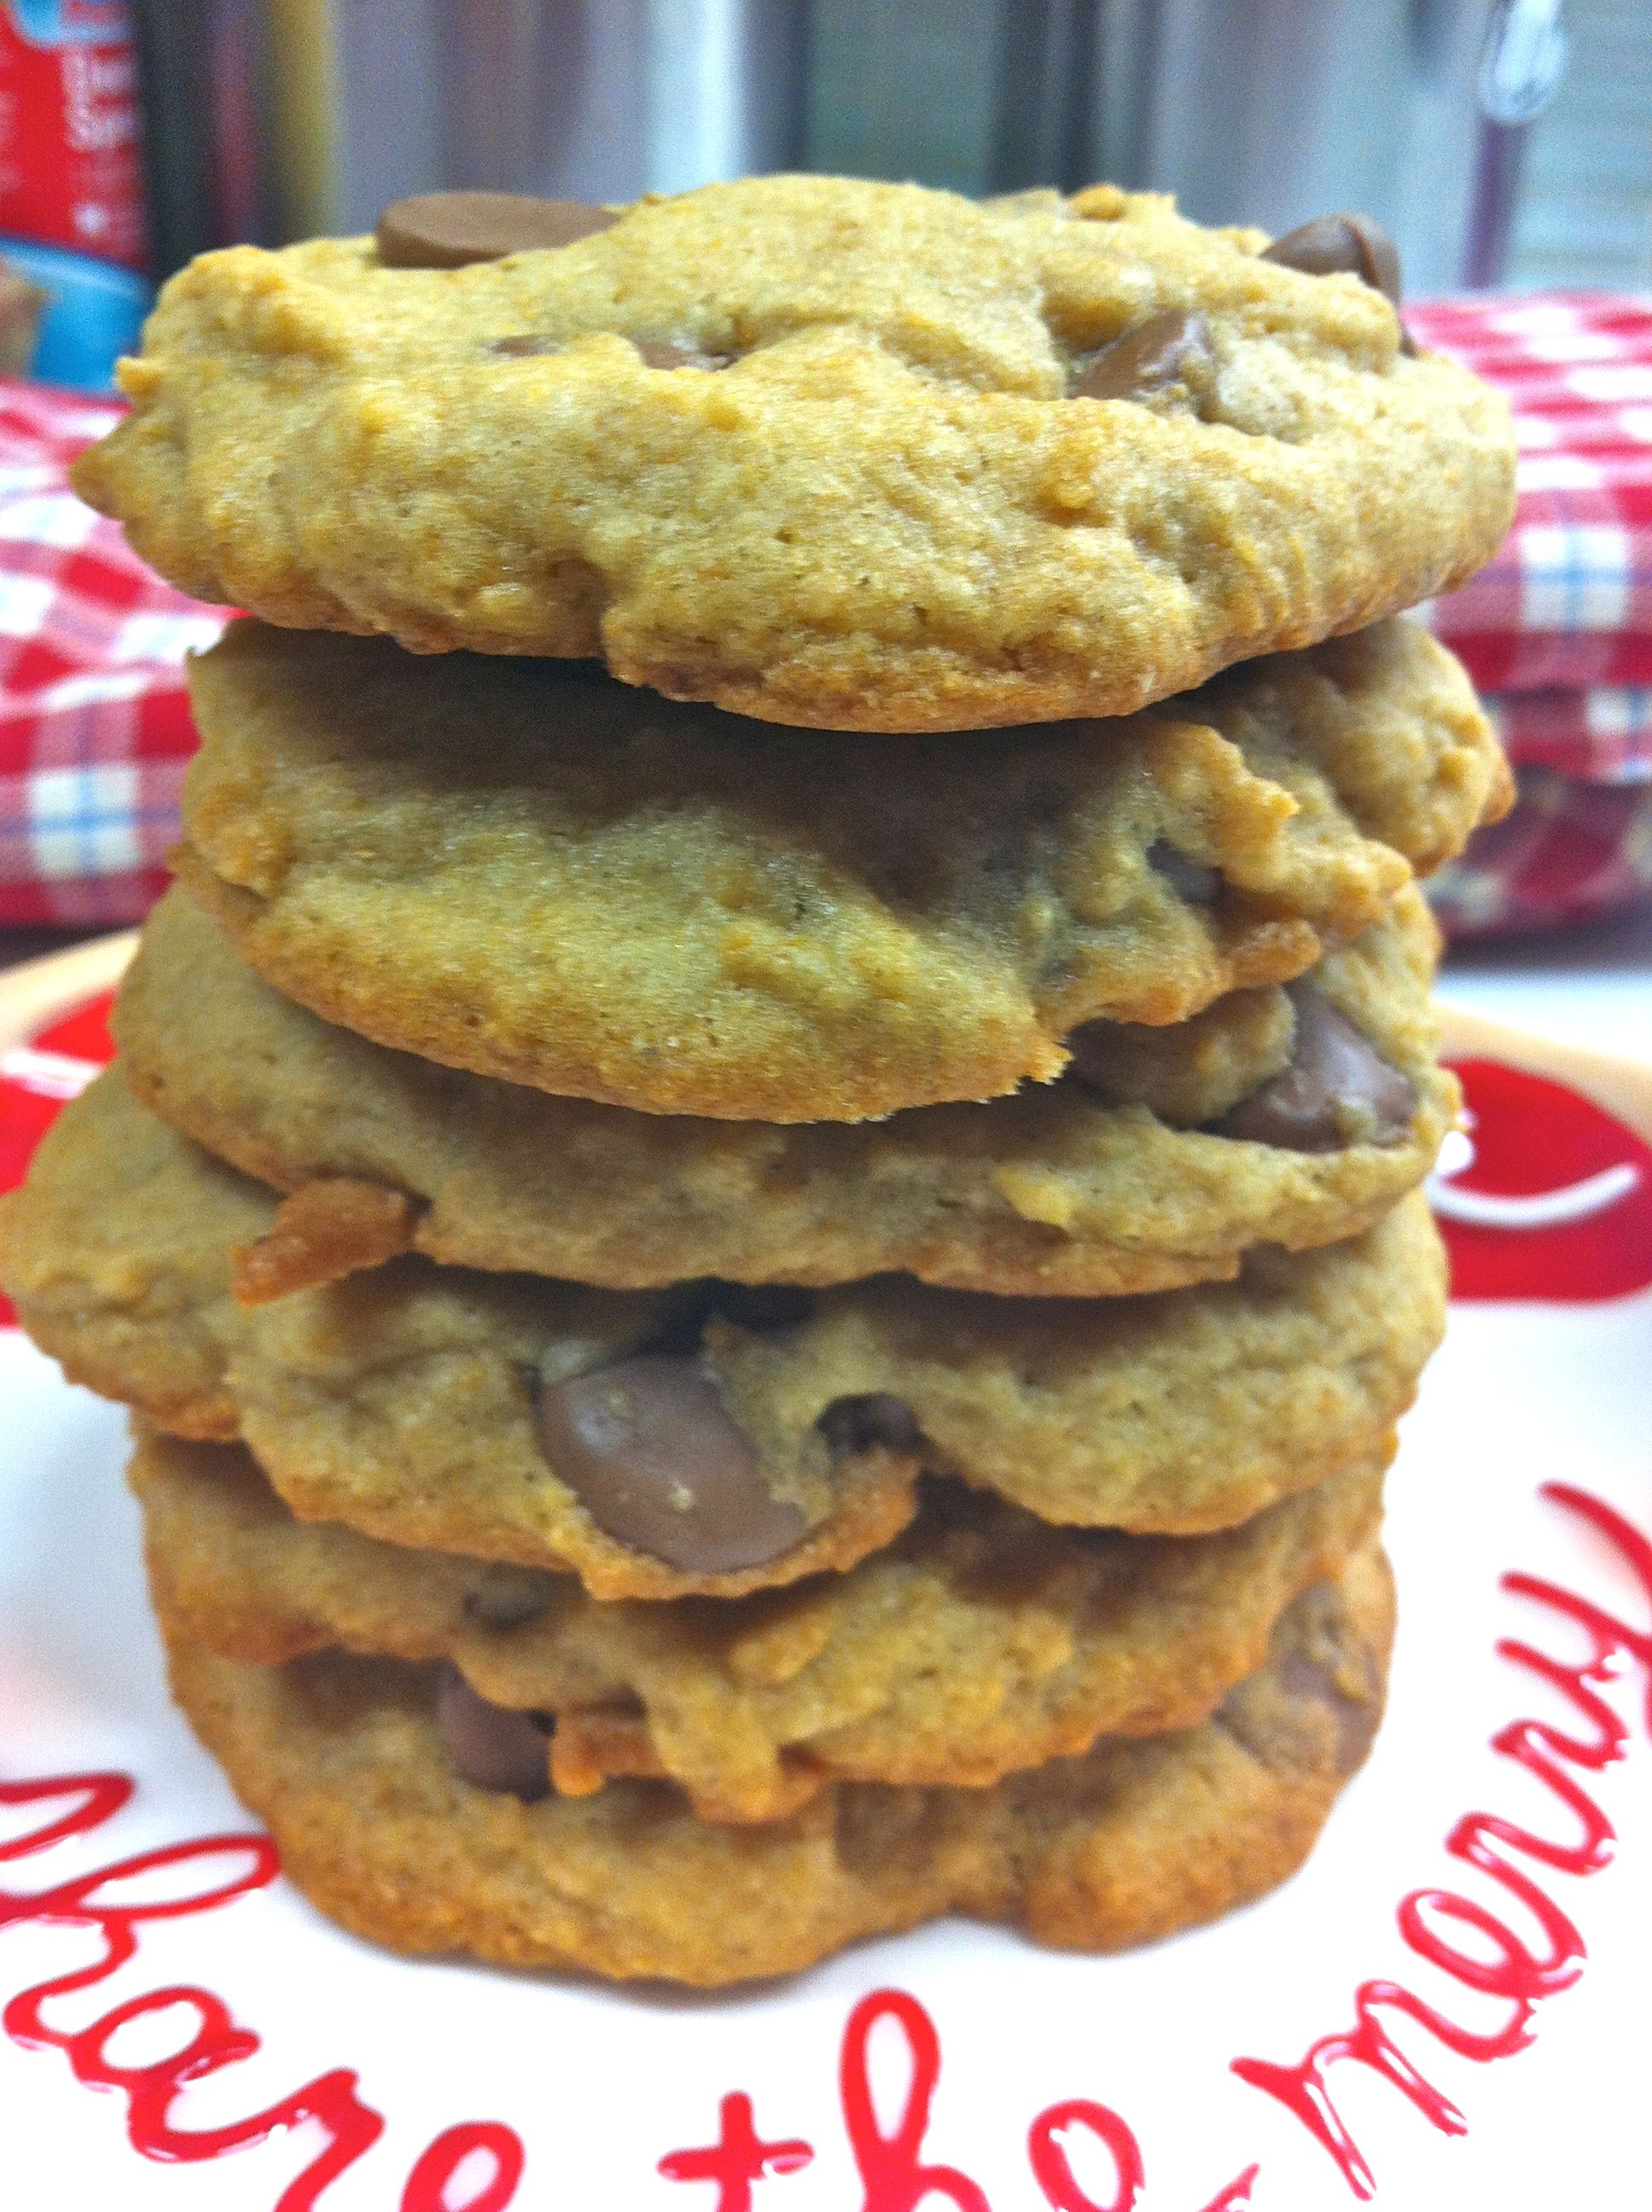 Soft & Chewy Vegan Chocolate Chip Cookies